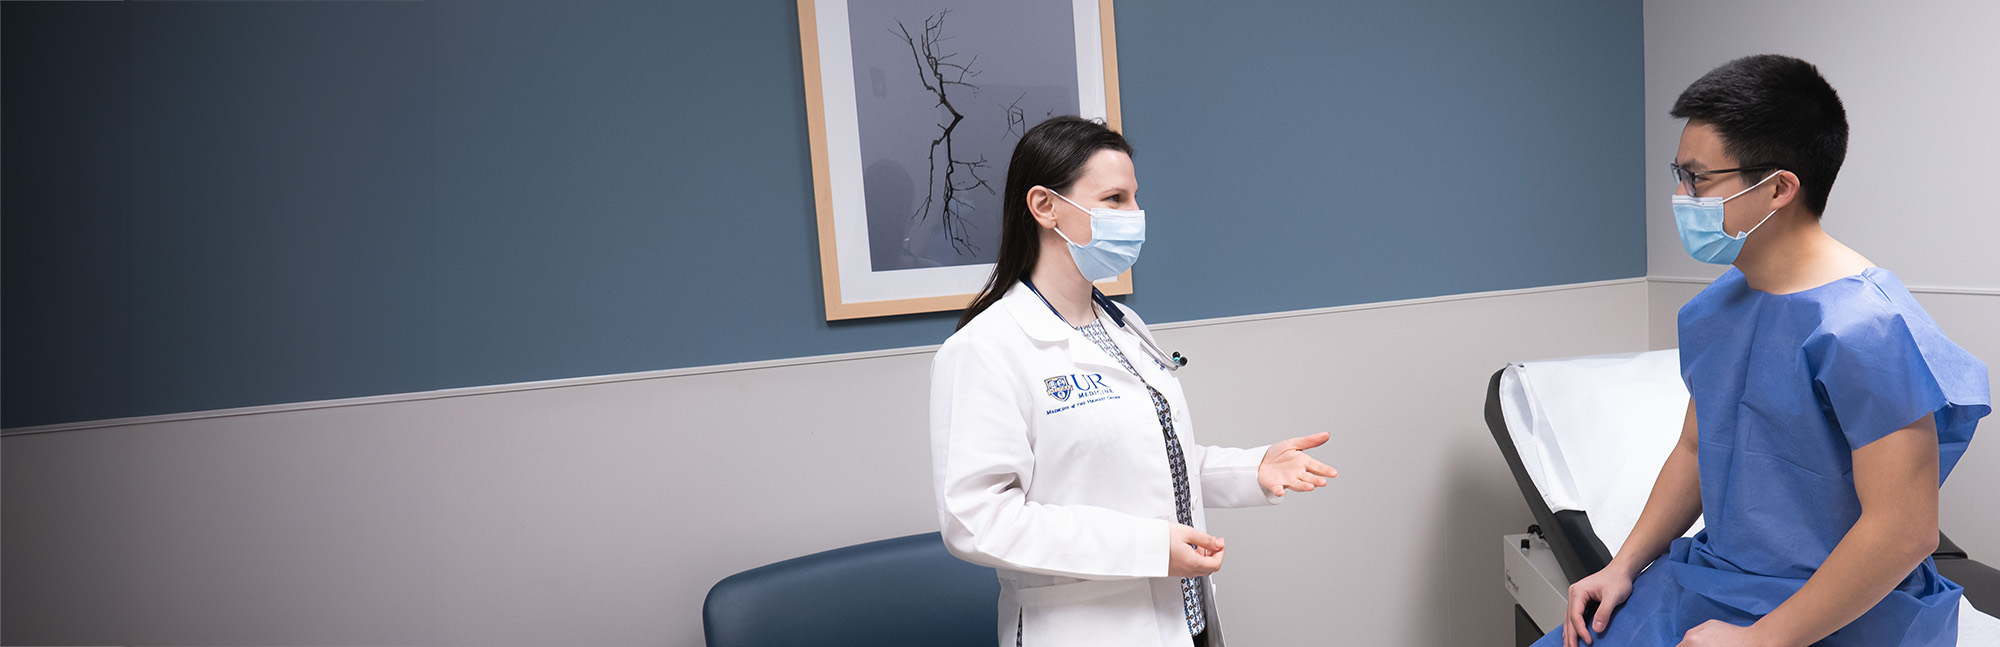 Doctor talking with patient in medical office